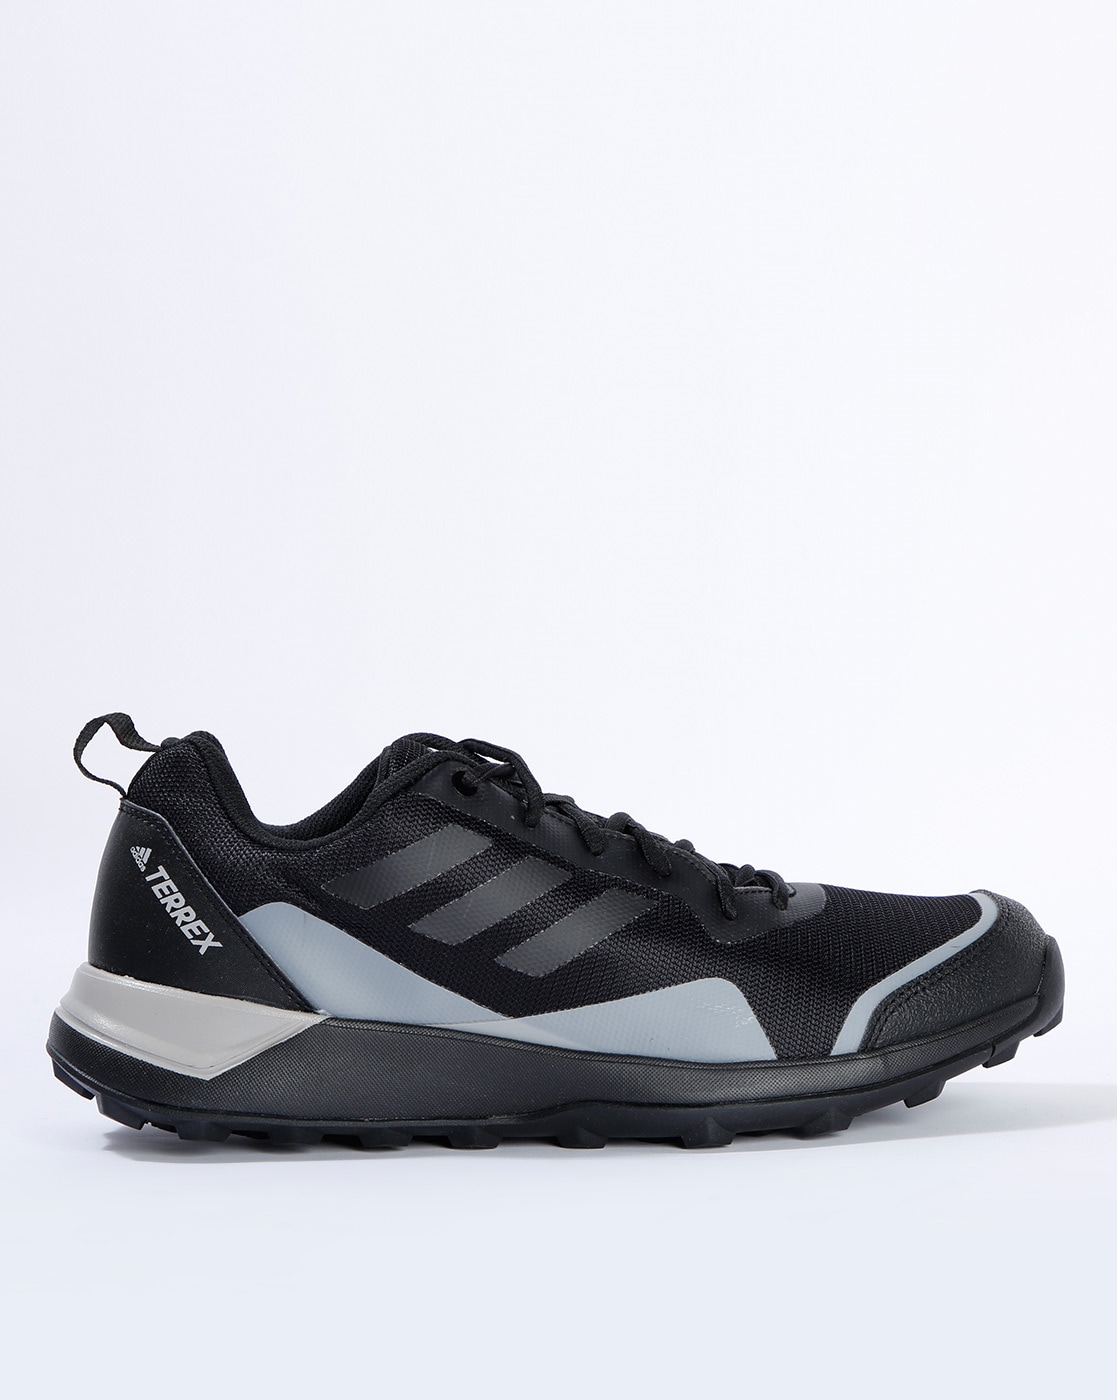 adidas outdoor shoes